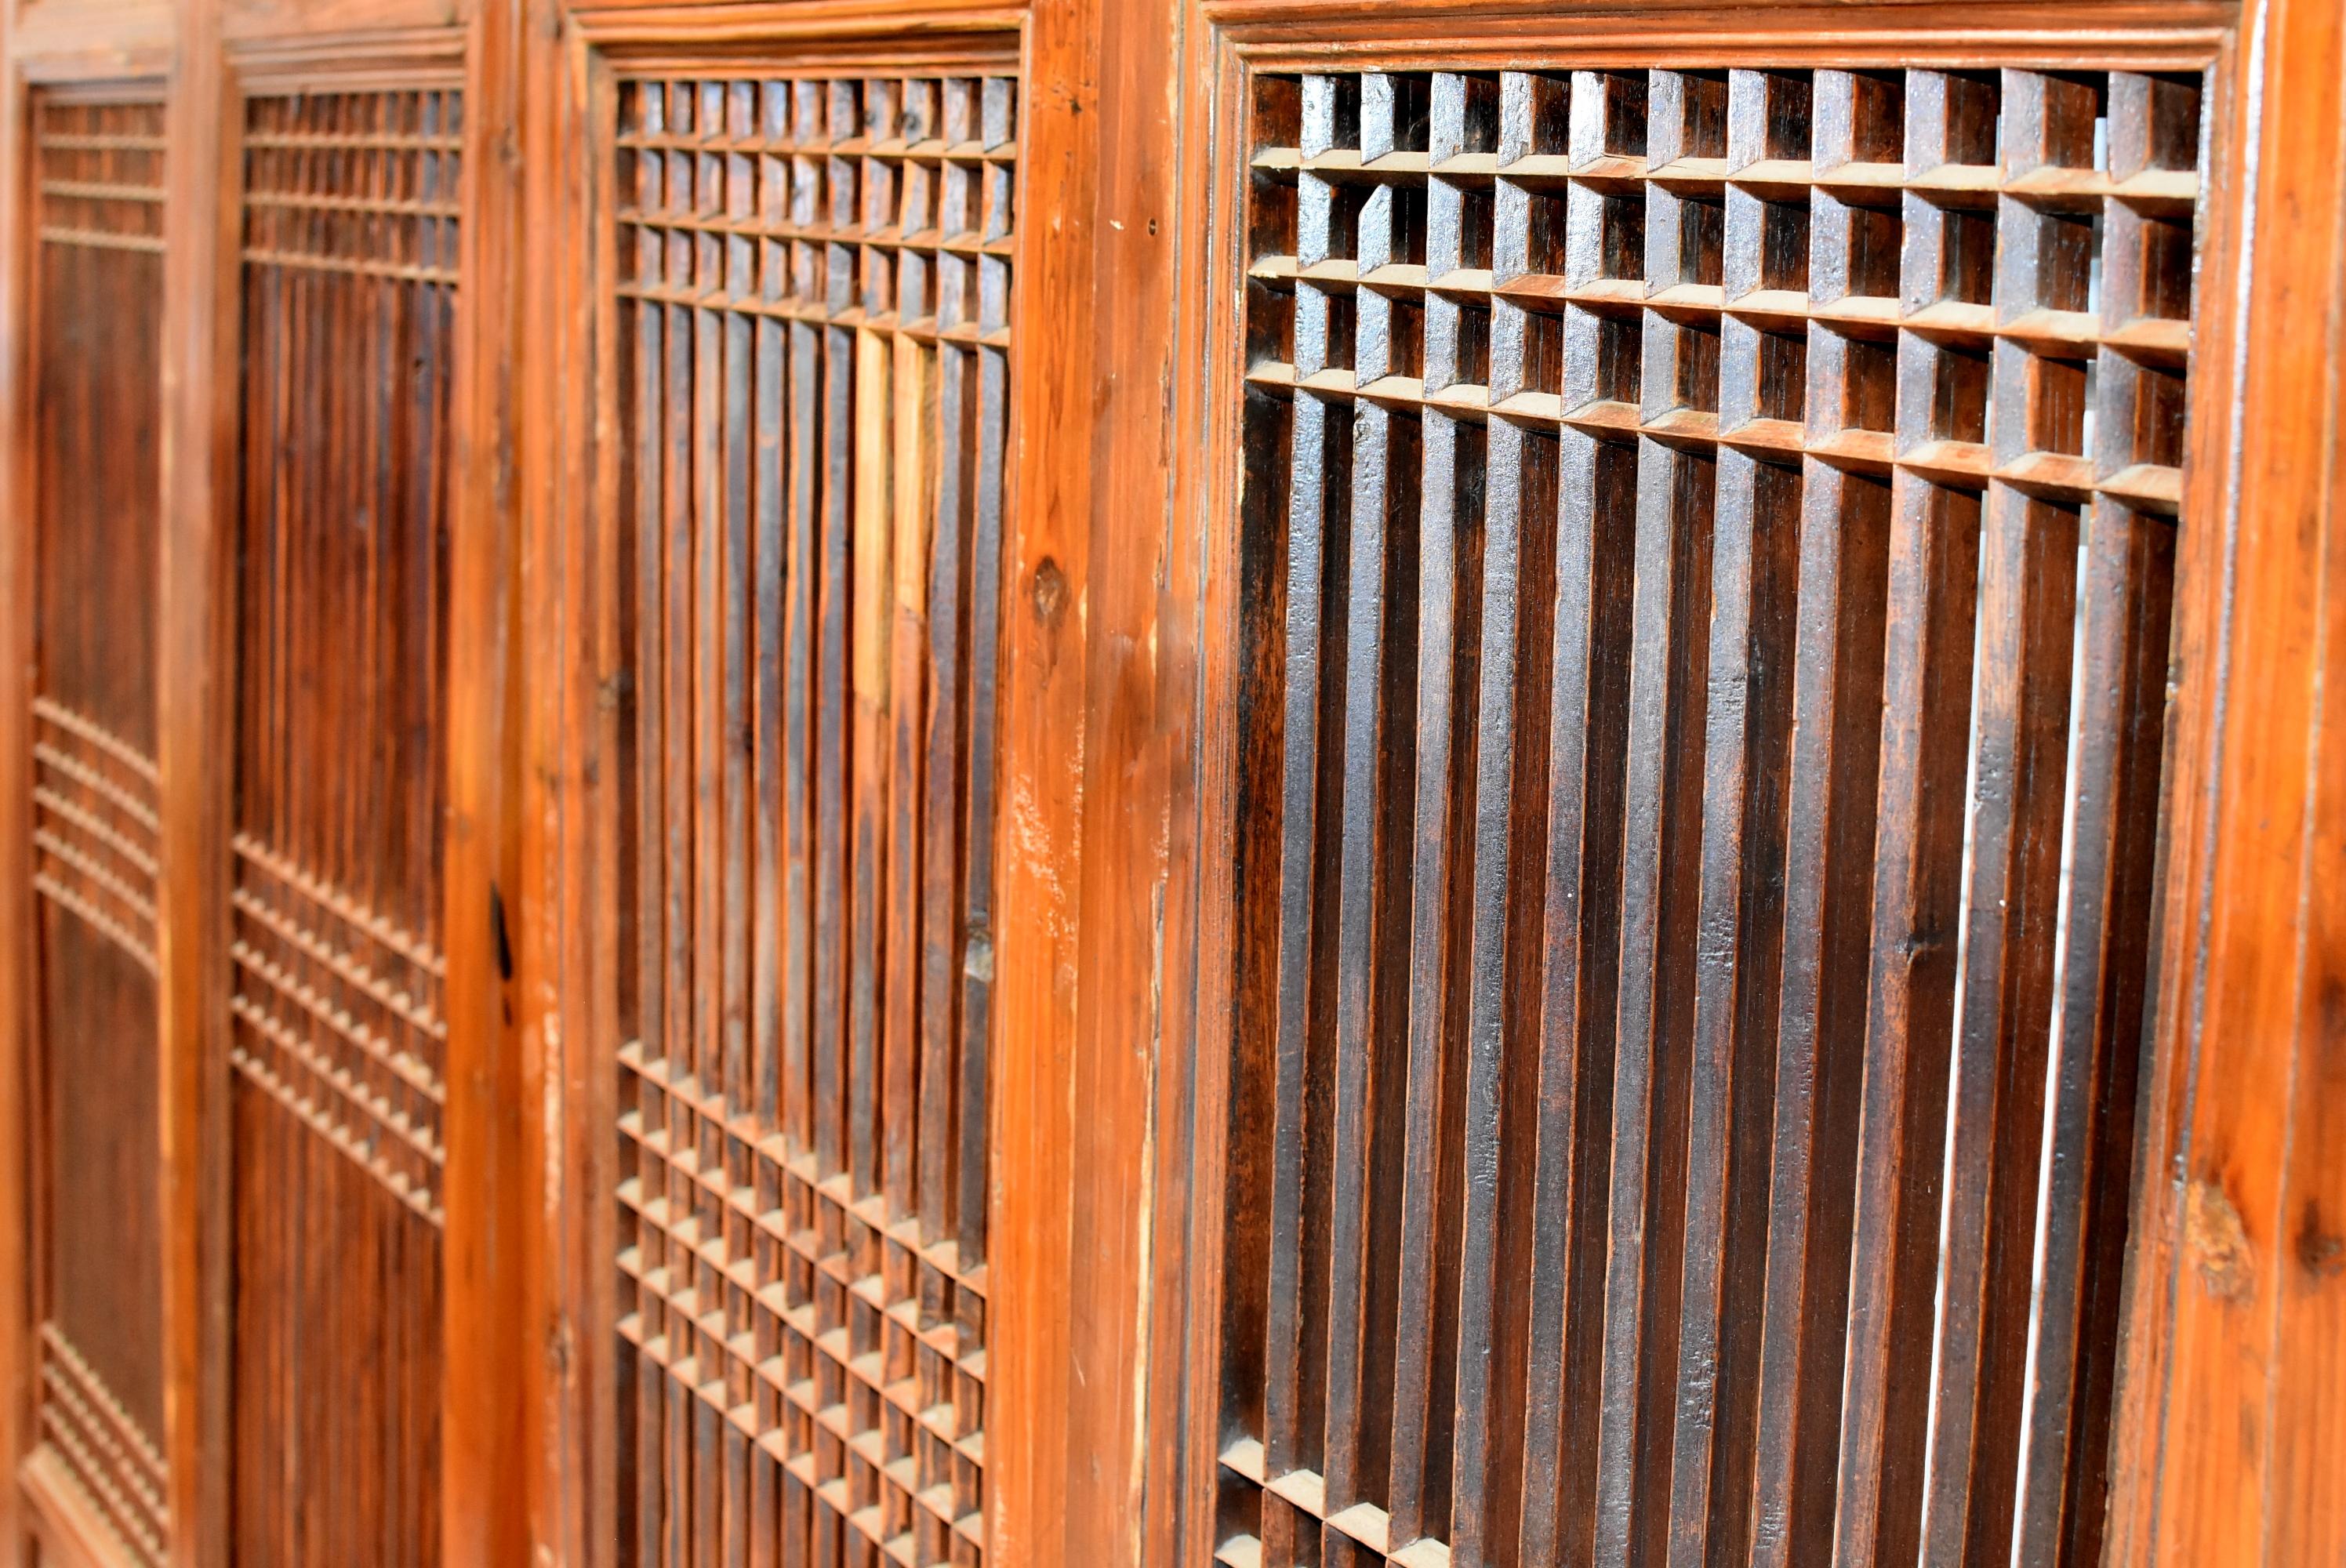 These beautiful window screens are wonderful examples of Ming Dynasty's simple elegant style. Lines are formed painstakingly by hand via the traditional joinery method of tenons and mortises. Unlike the common block bars, these bars are tapered on